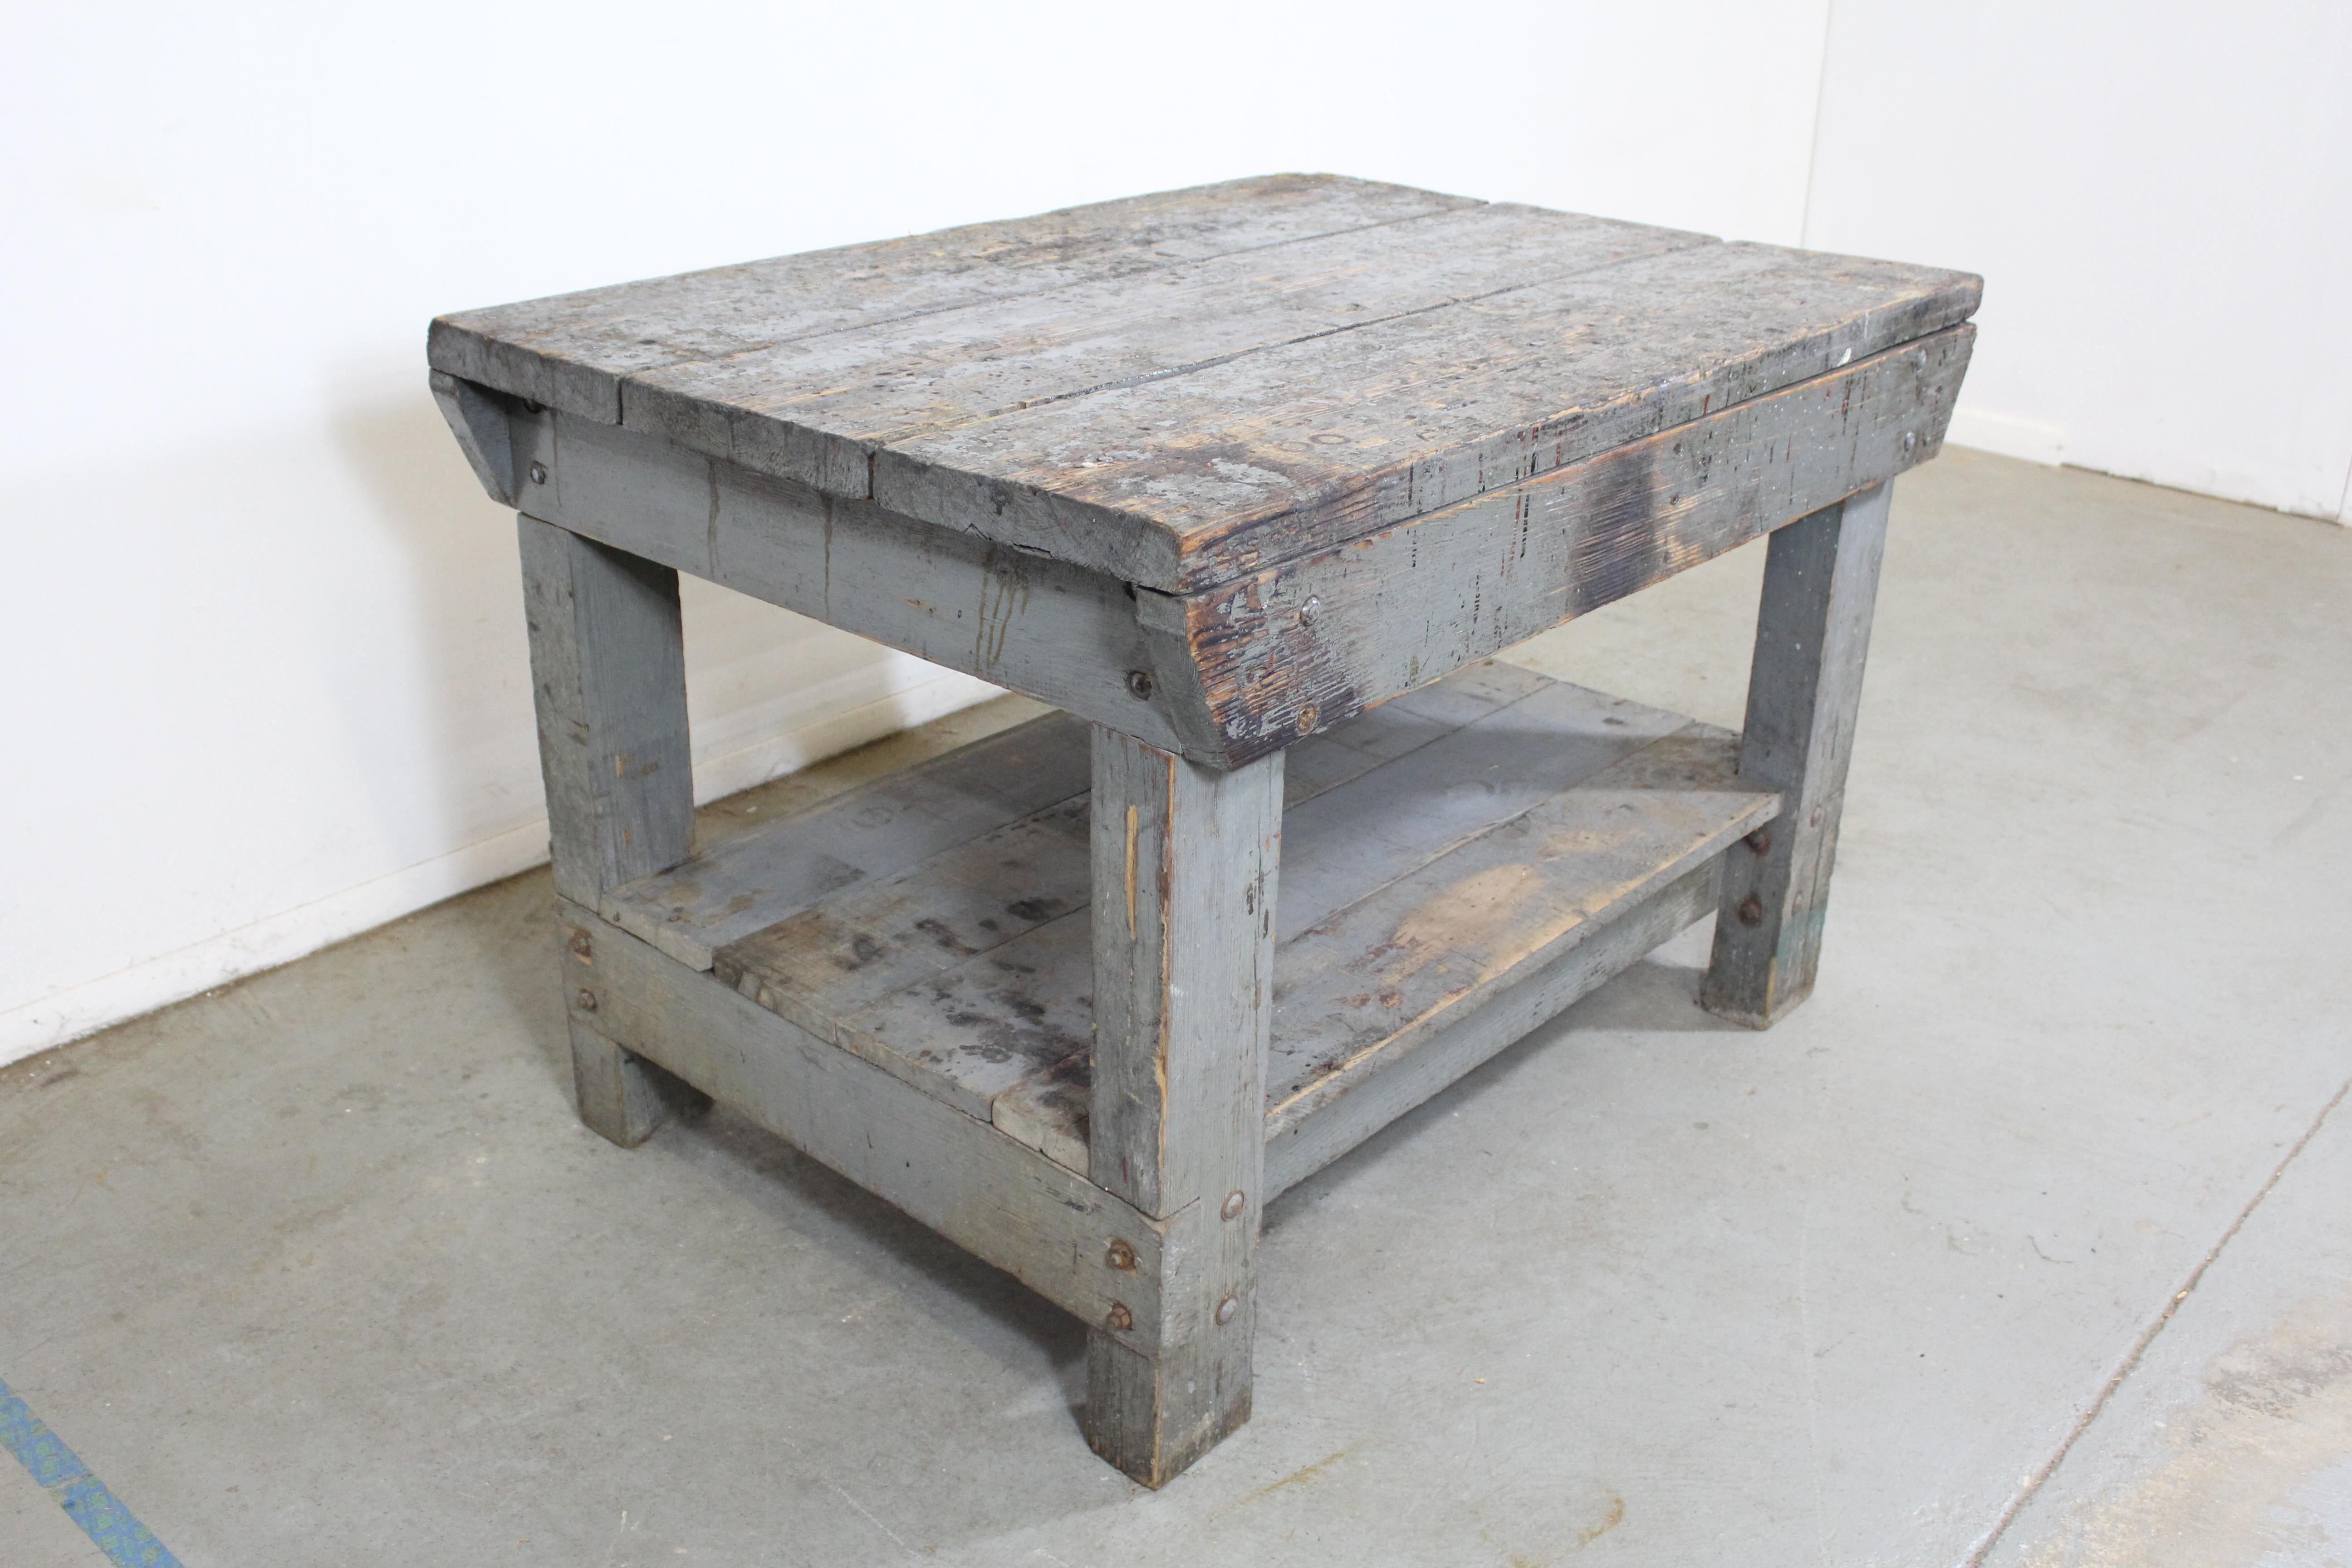 Vintage antique rustic industrial primitive workbench island drawers, 1930s

Offered is vintage/antique industrial/rustic style workbench, circa 1930s. This piece has a rustic look with obvious signs of age wear throughout (stains, chips,